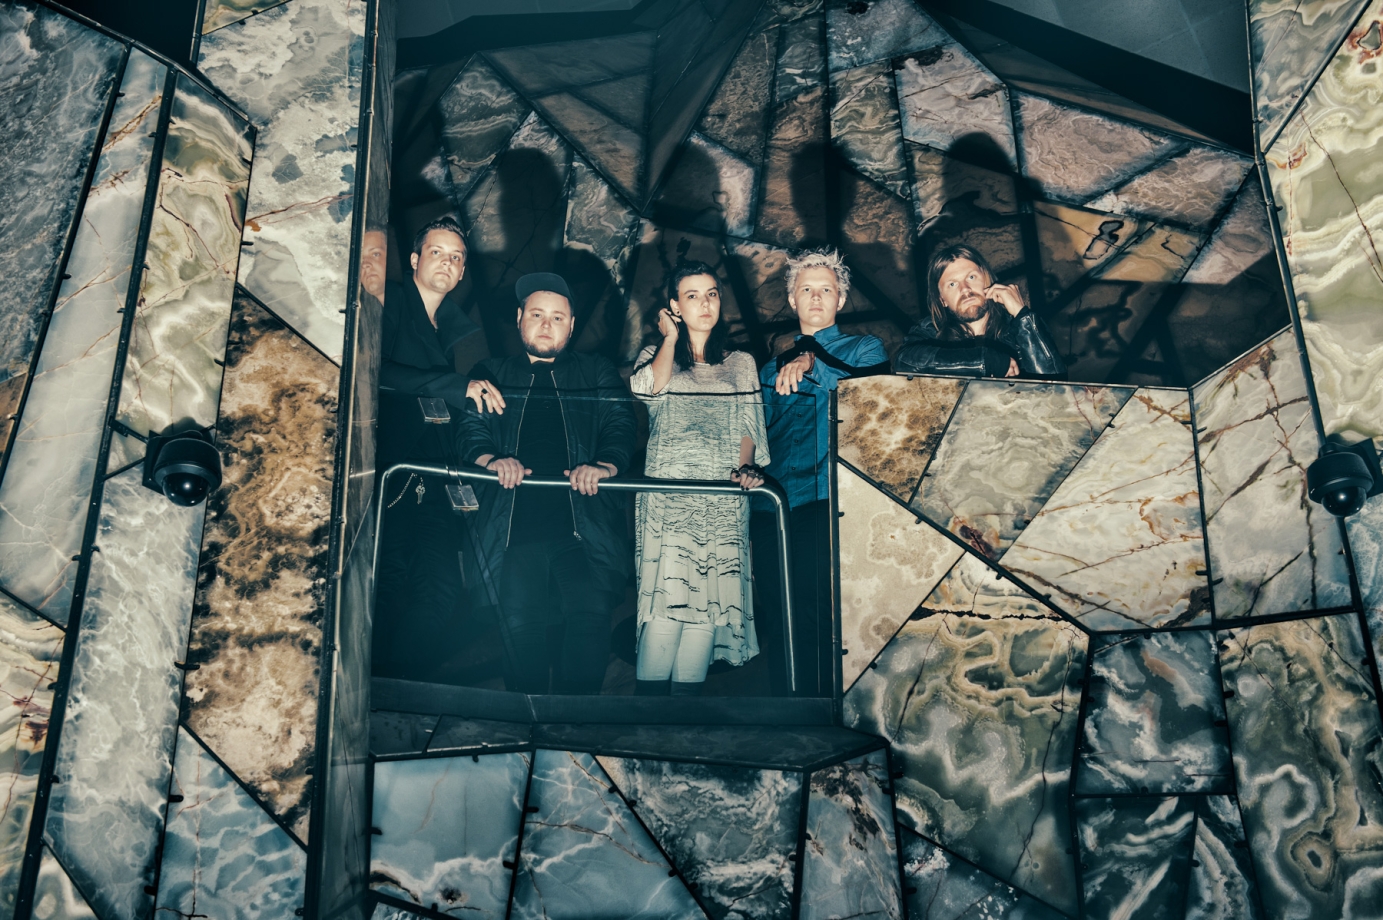 Photography for Of Monsters and Men by chadkamenshine